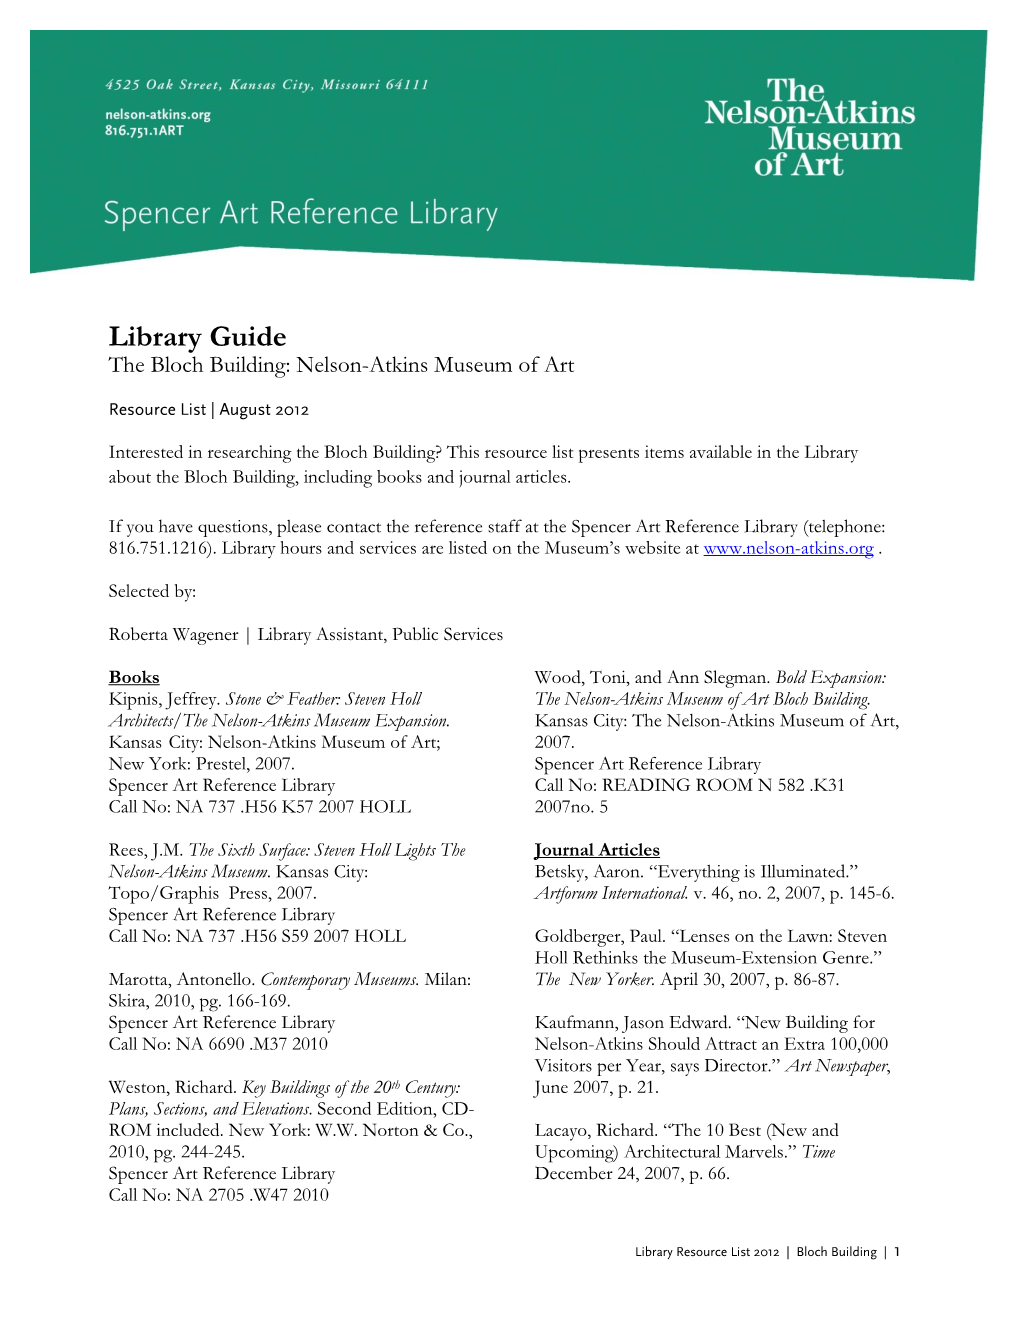 Library Guide the Bloch Building: Nelson-Atkins Museum of Art